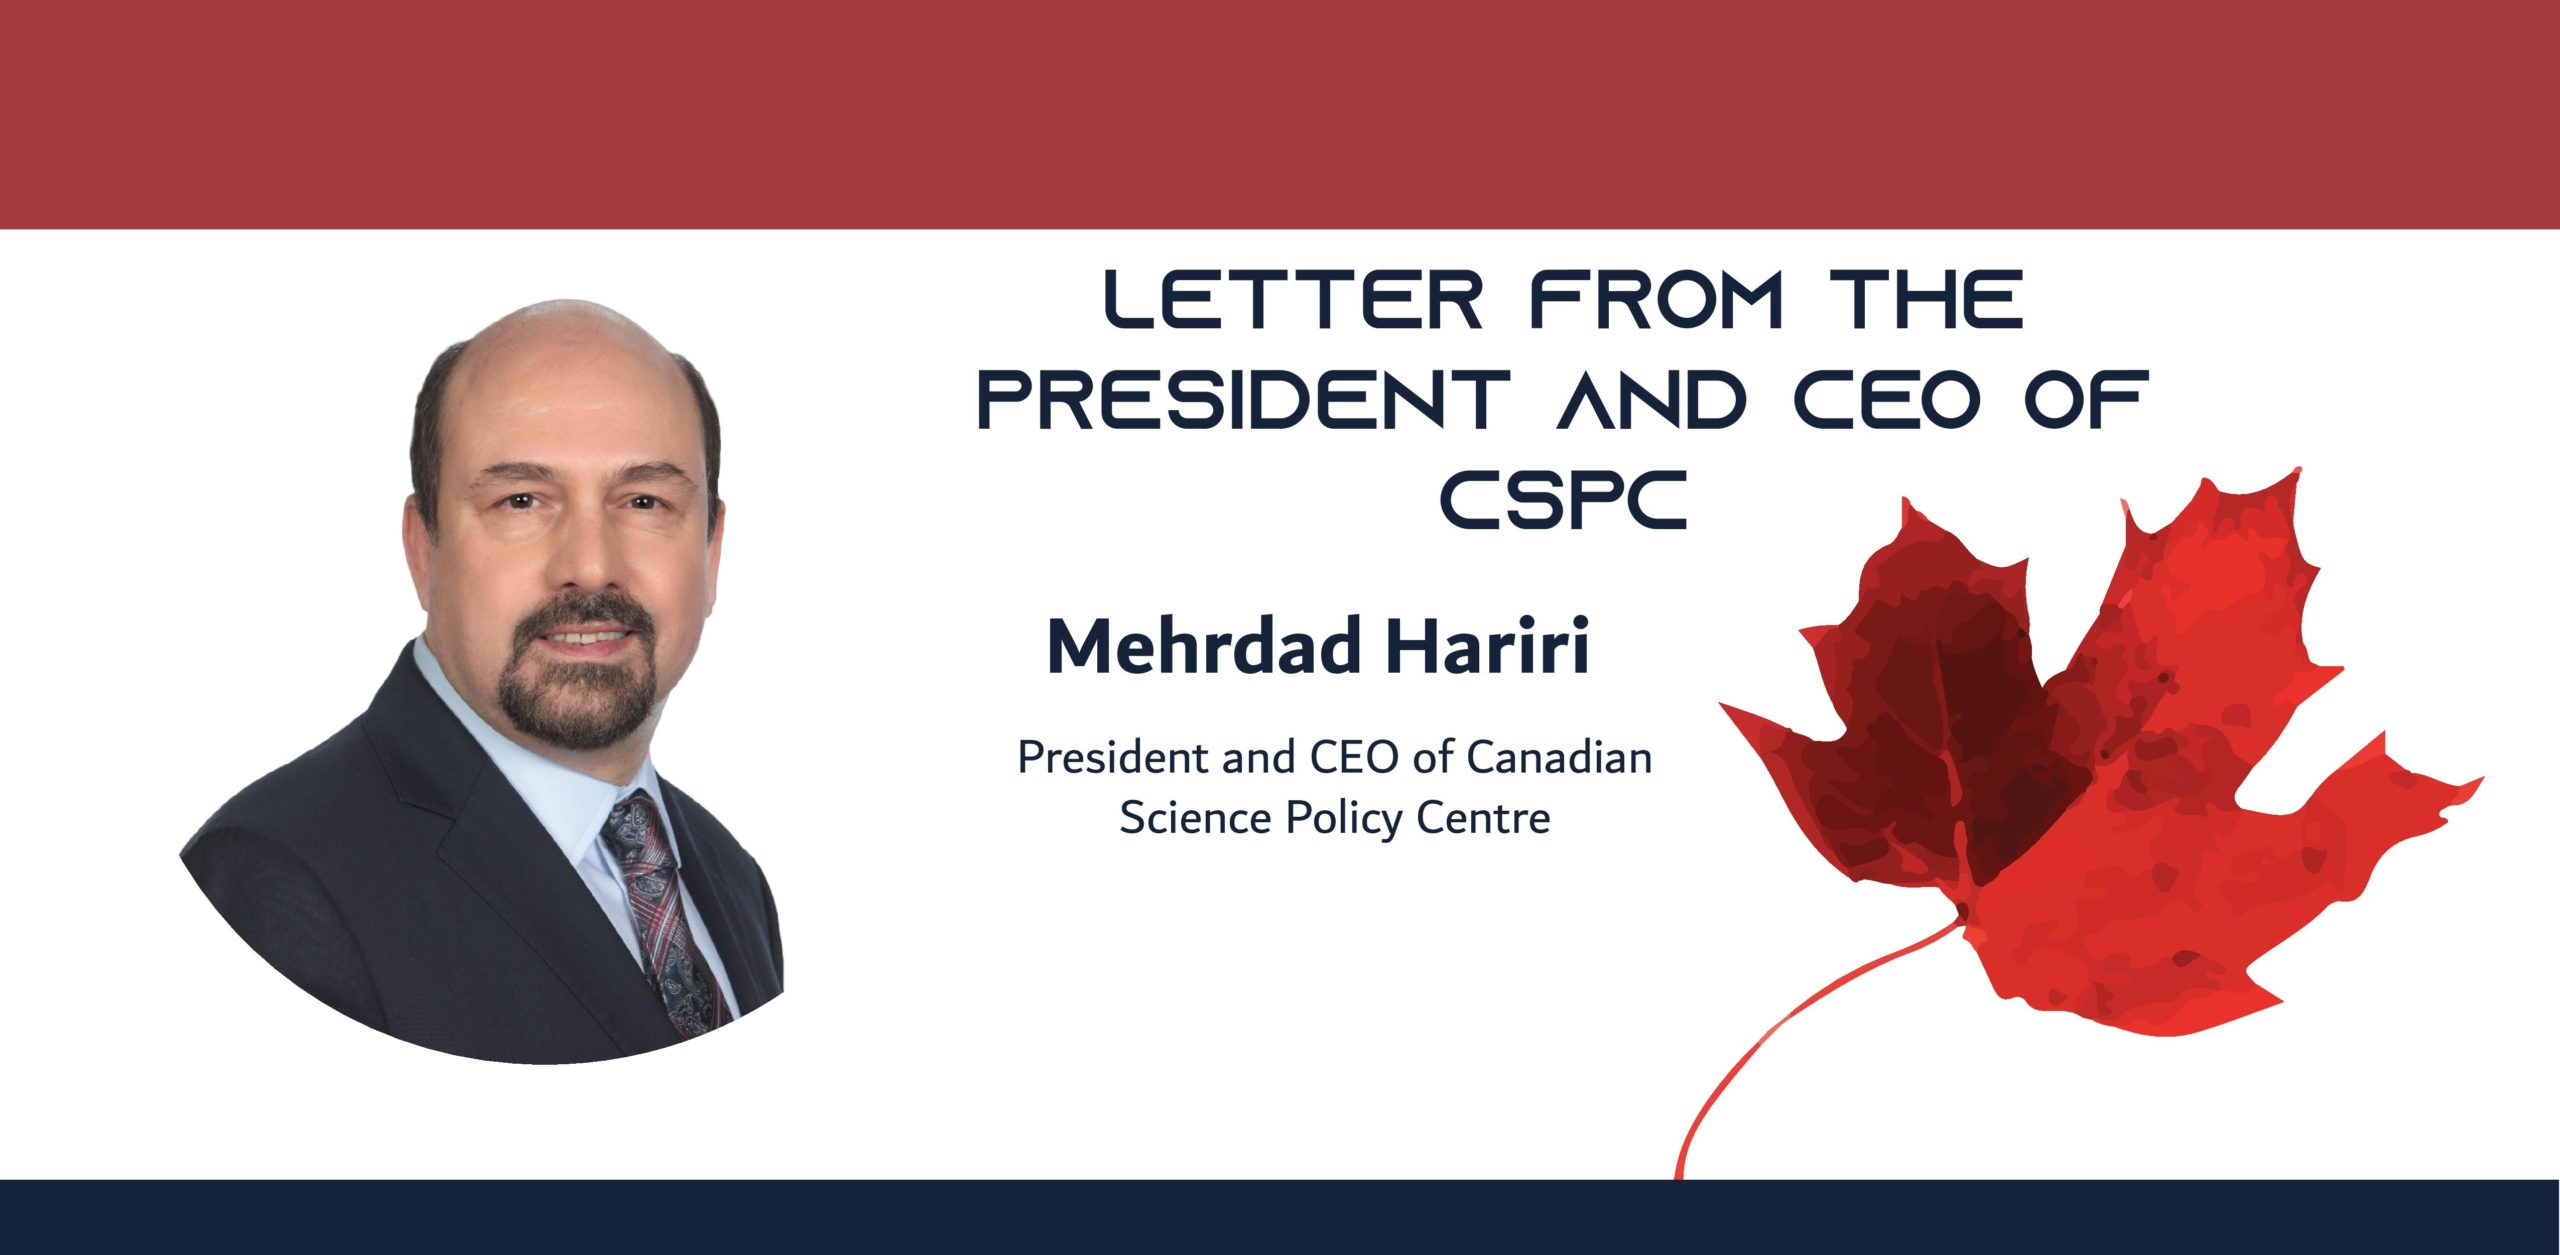 Headshot of a man in a suit with the text "Letter from the President and CEO of CSPC, Mehrdad Hariri, President and CEO of the Canadian Science Policy Center" followed by a maple leaf.